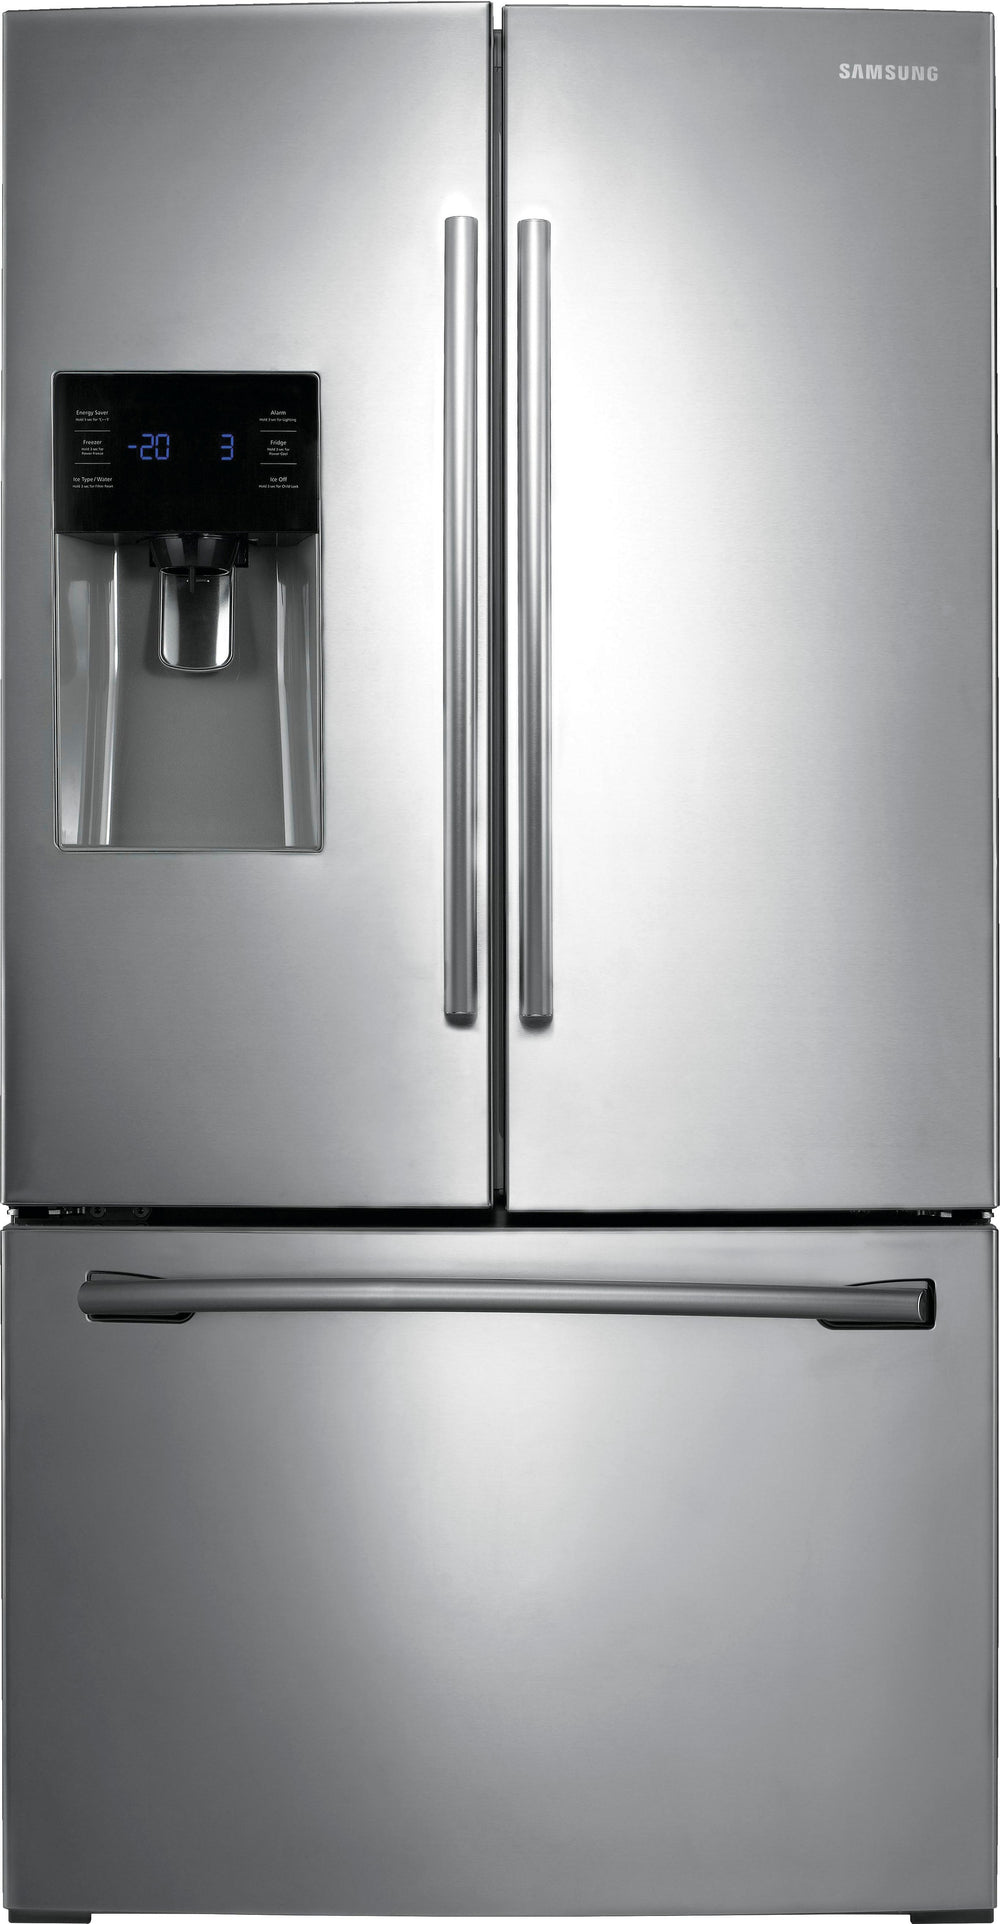 Samsung - 24.6 Cu. Ft. French Door Refrigerator with Thru-the-Door Ice and Water - Stainless steel_1